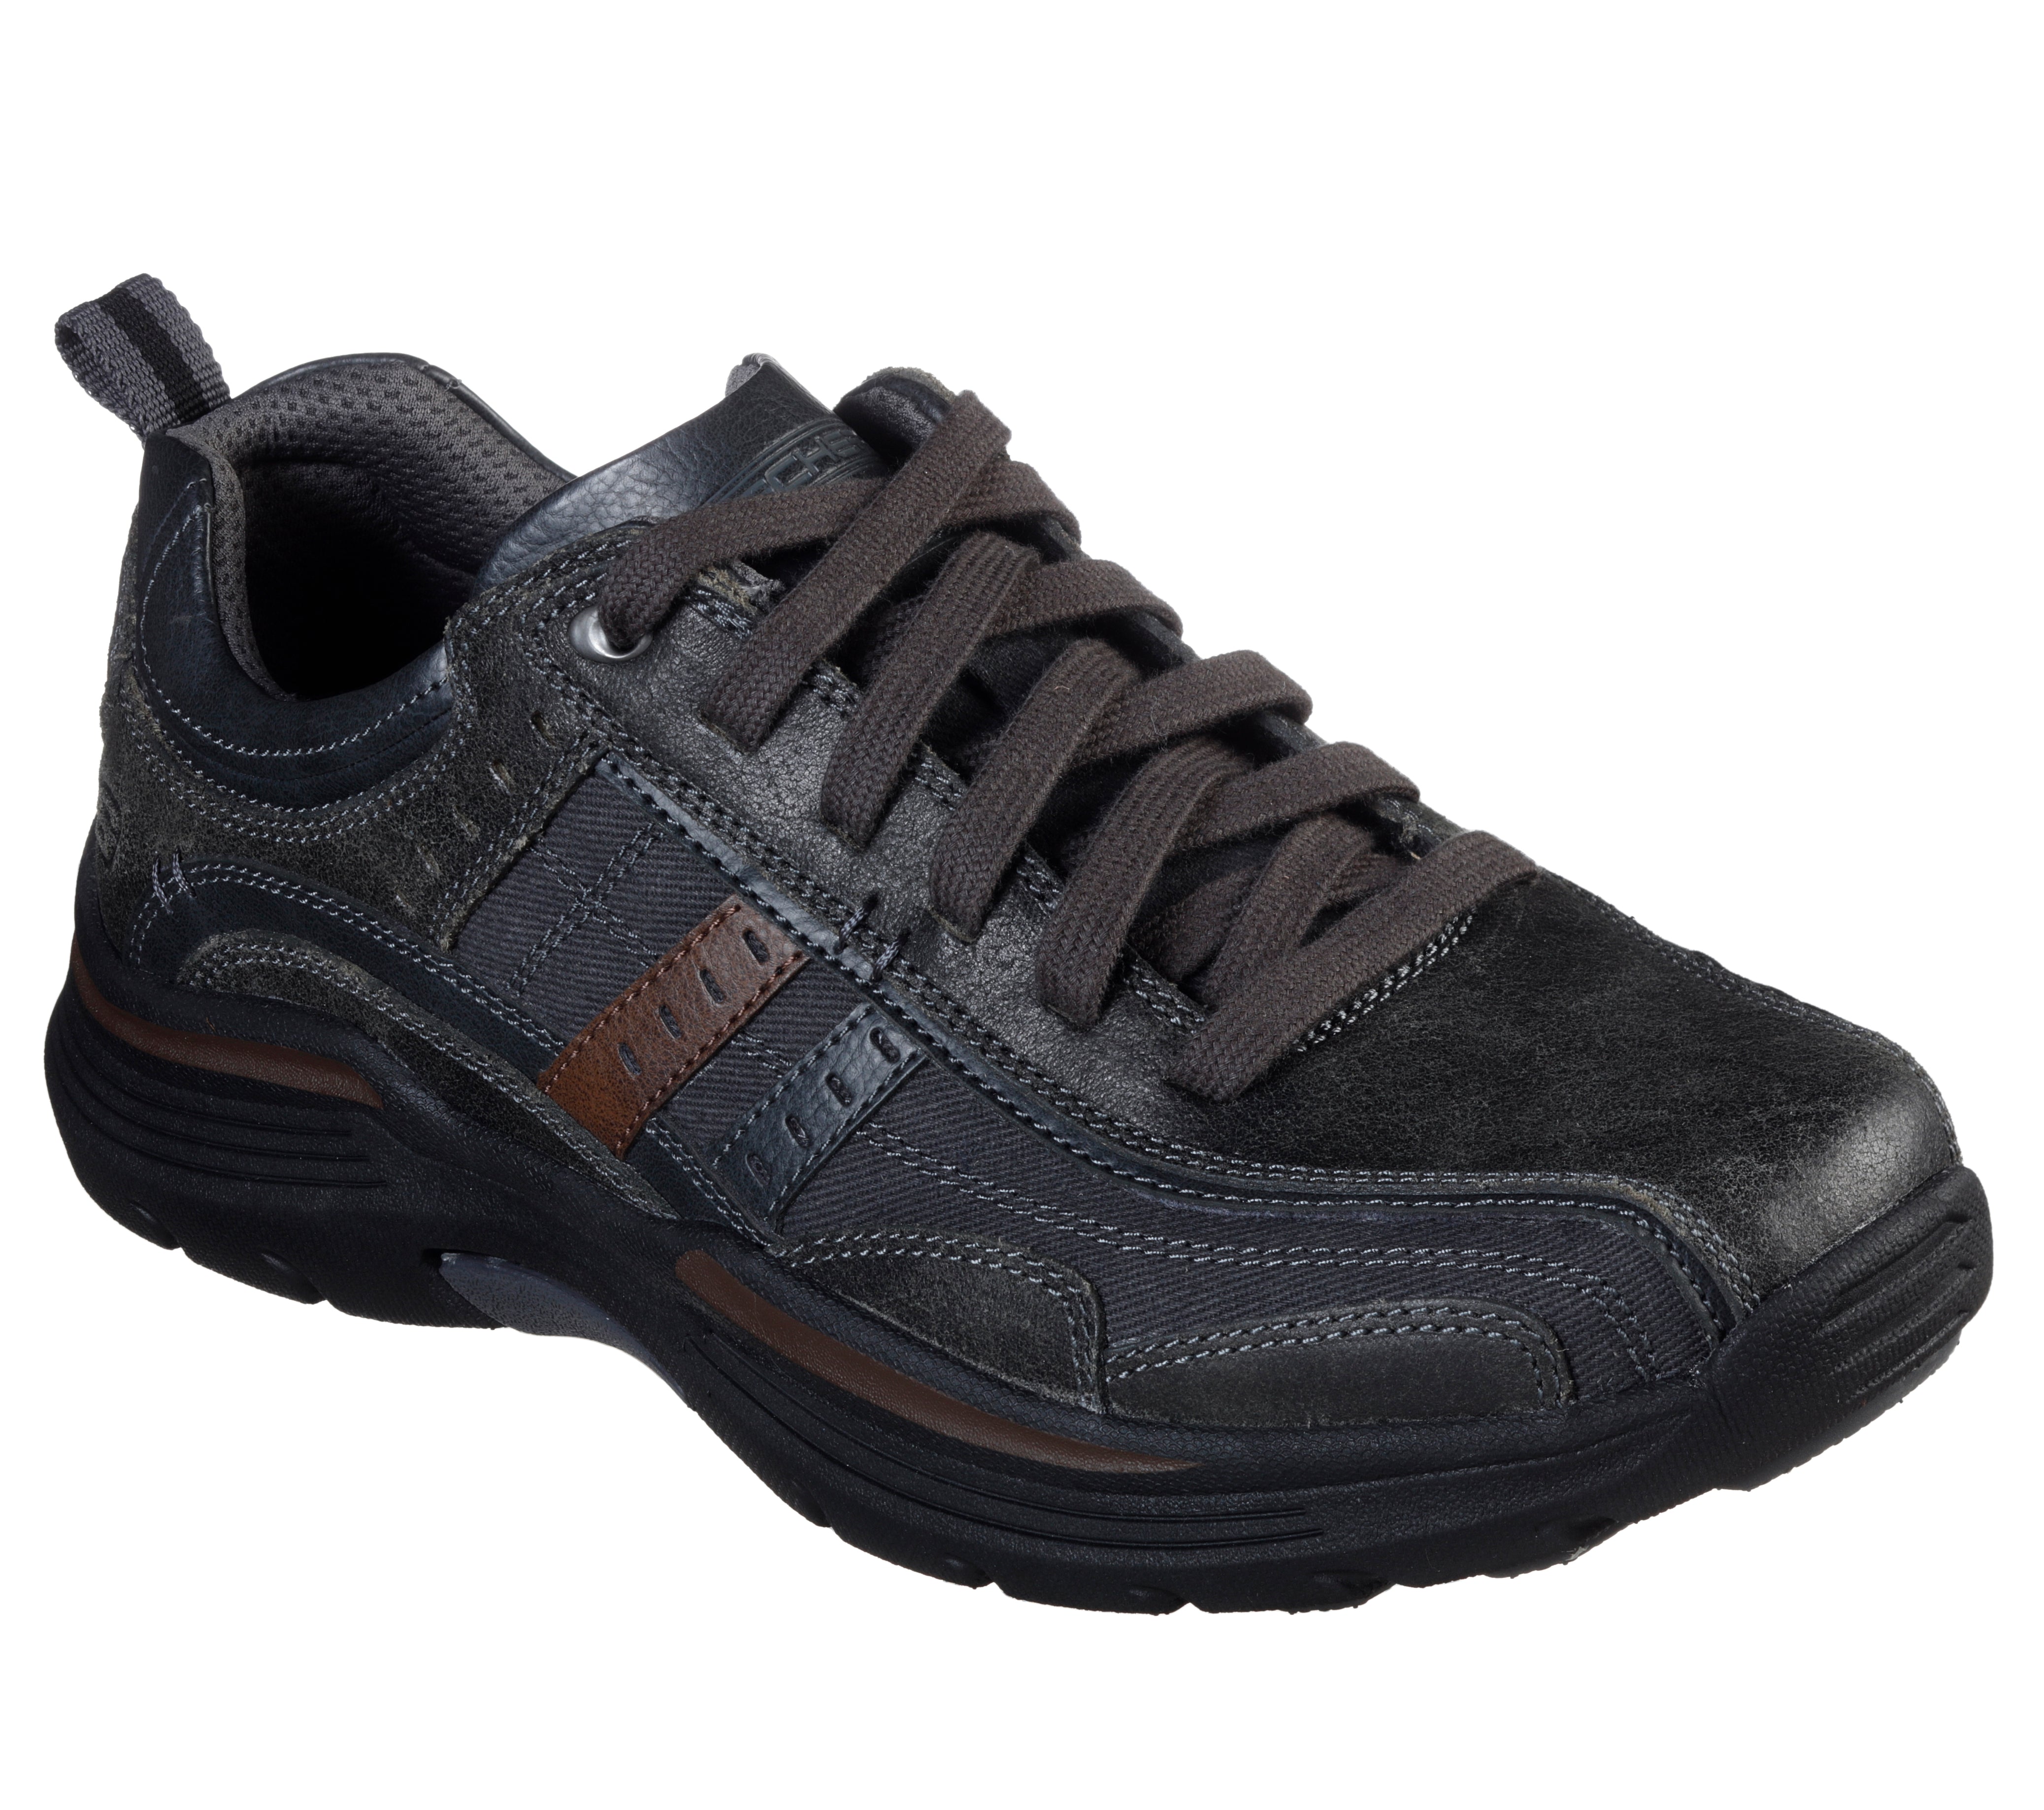 Skechers' Men's Expended Manden Lace Up - Charcoal – Outfitter